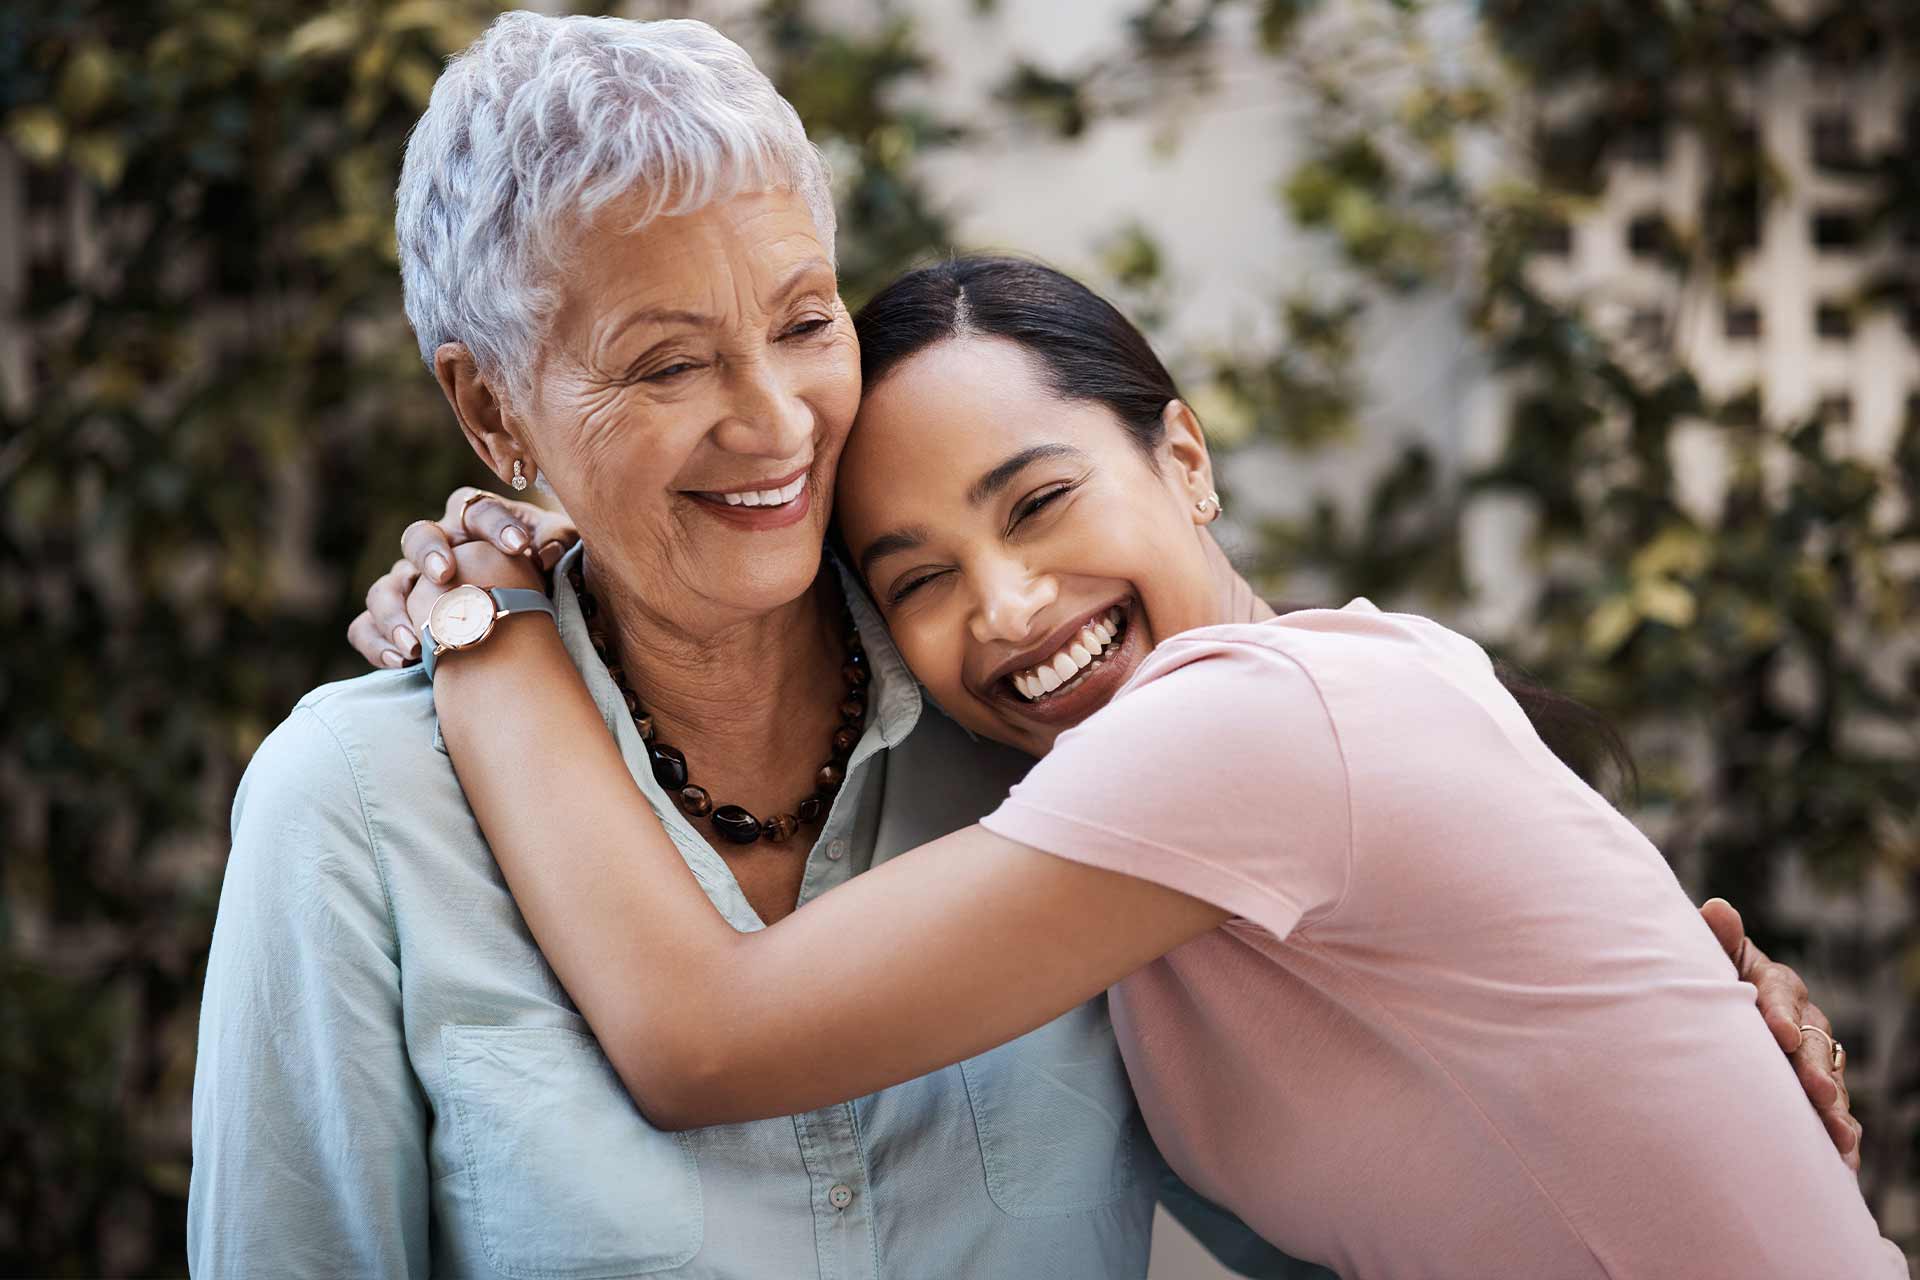 Spanish woman smiling and hugging a mother figure outside